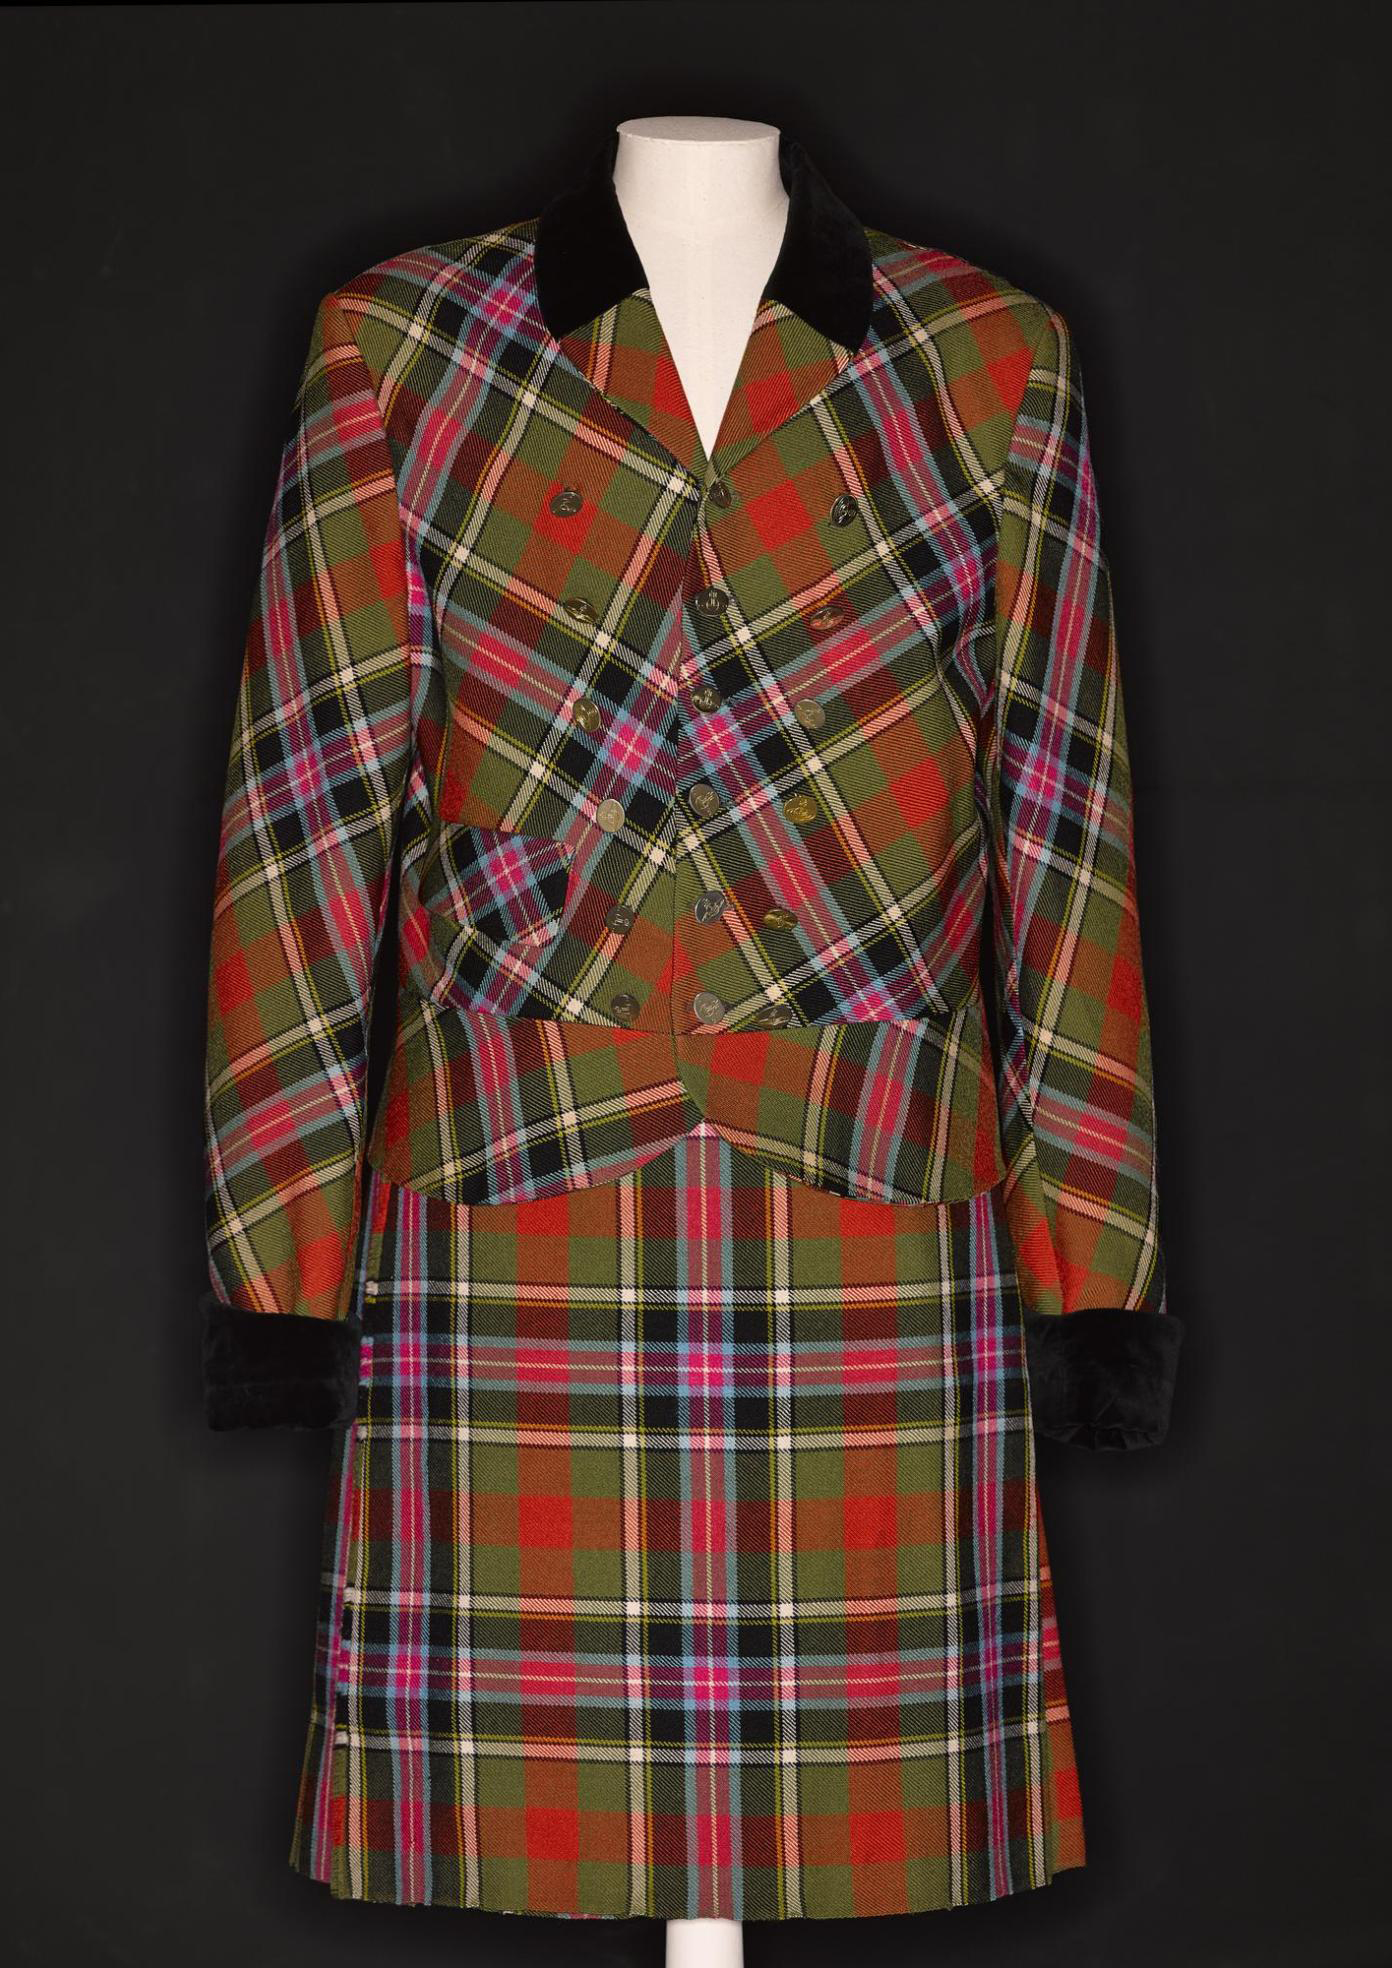 On the march with the tartan army | National Museums Scotland Blog